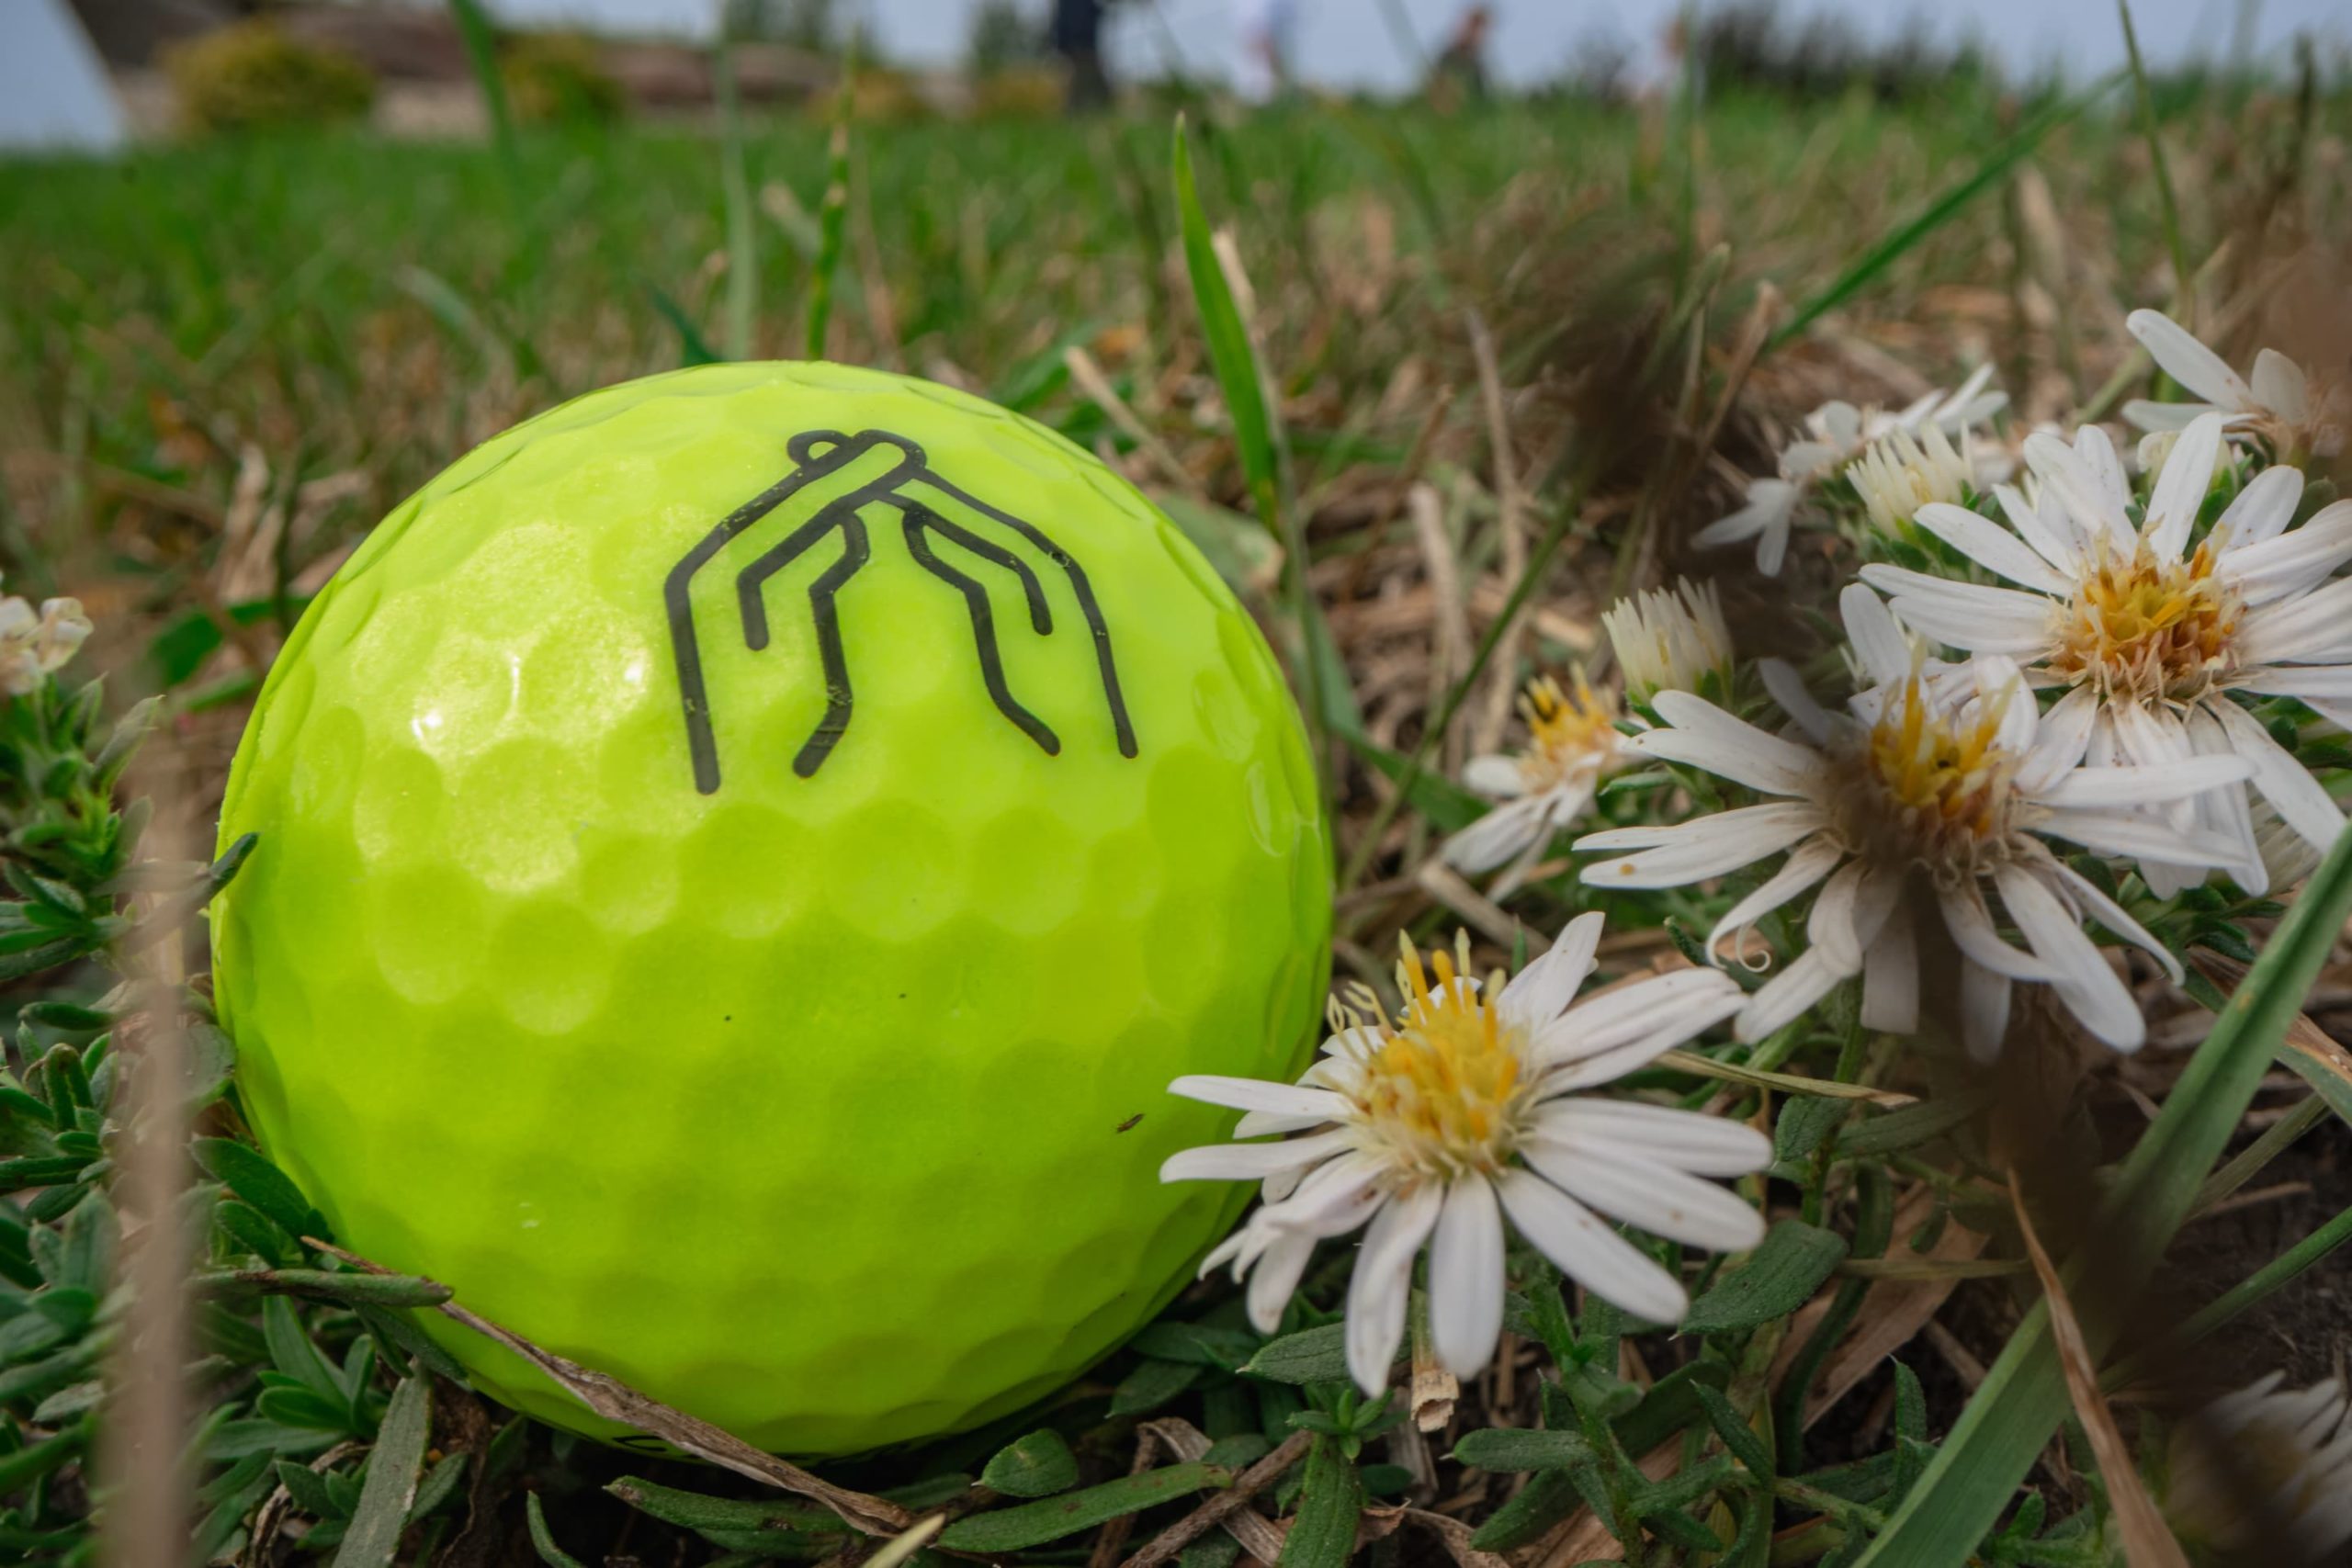 a golf ball with the Mend The Gap logo sits in the grass